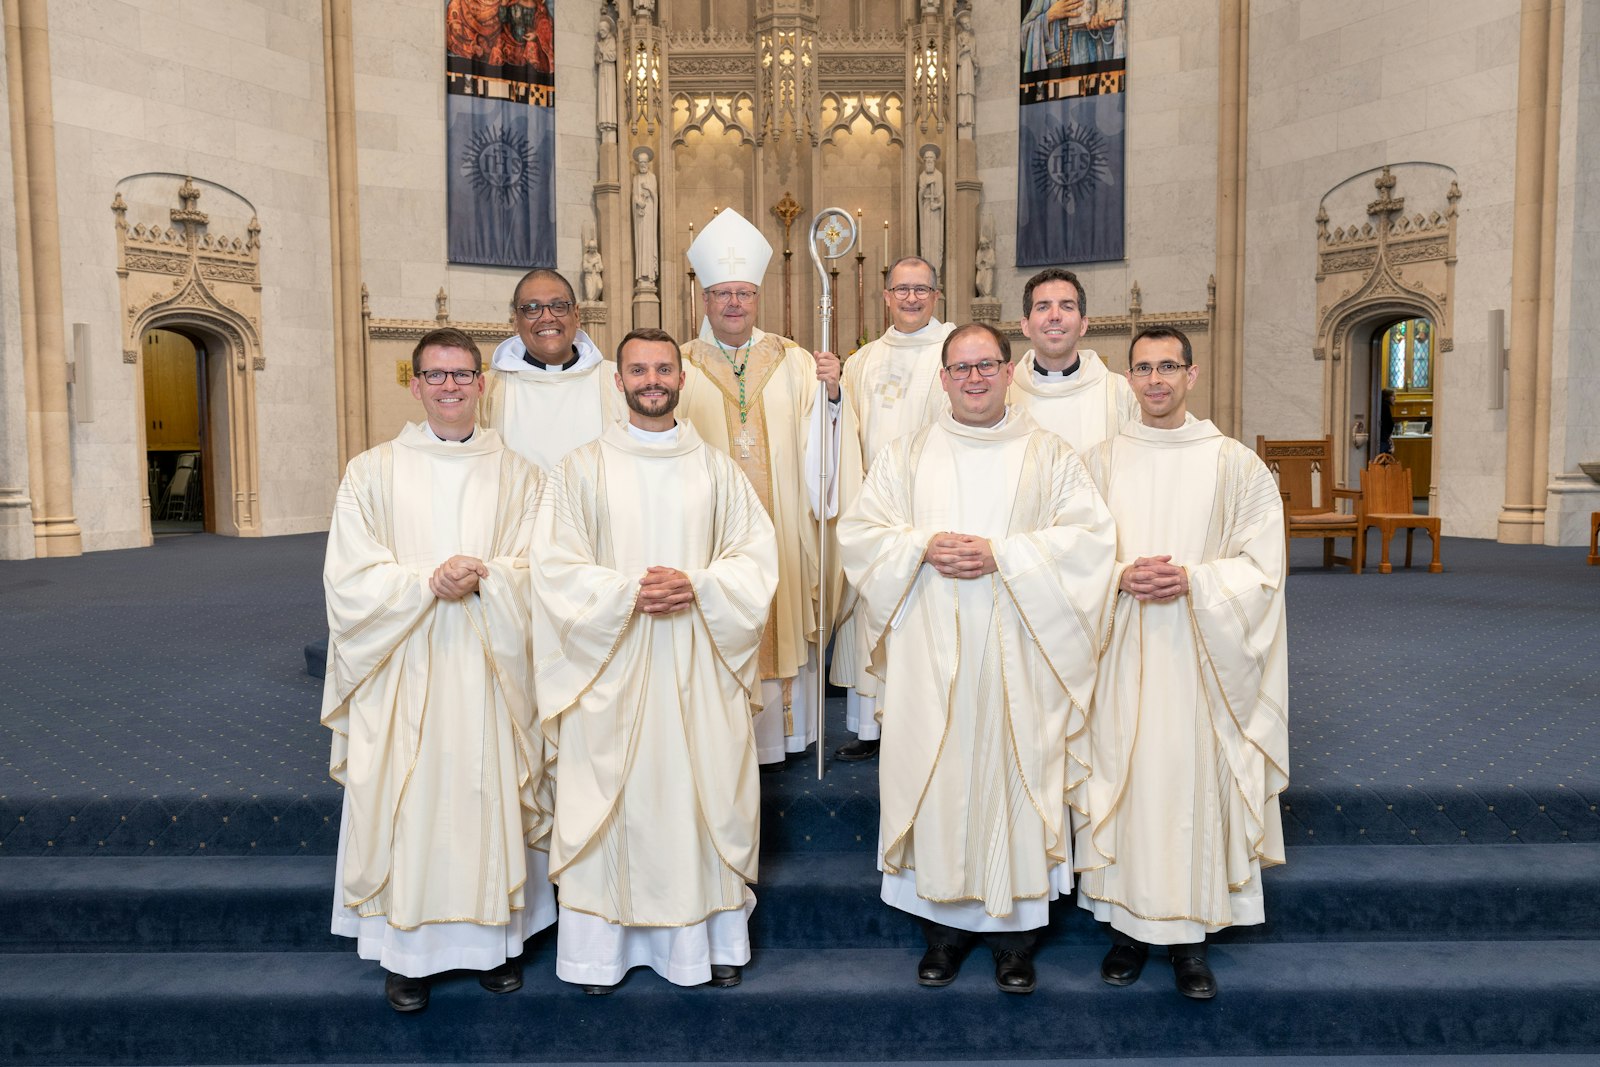 The Midwest Jesuits ordained six men to priestly ministry on June 10 at the Church of the Gesu in Milwaukee. Left to right are Fr. Daniel J. Dixon, SJ; Fr. Damian G. Torres-Botello, SJ; Fr. Aaron W. Pierre, SJ; 
Cleveland Bishop Edward C. Malesic; Fr. Karl J. Kiser, SJ, provincial of the Midwest Province Jesuits; Fr. Daniel J. Kennedy, SJ; Fr. Nicholas A. Albin, SJ; and Fr. Andrea Bianchini, SJ. (Steve Donisch | Special to Detroit Catholic)